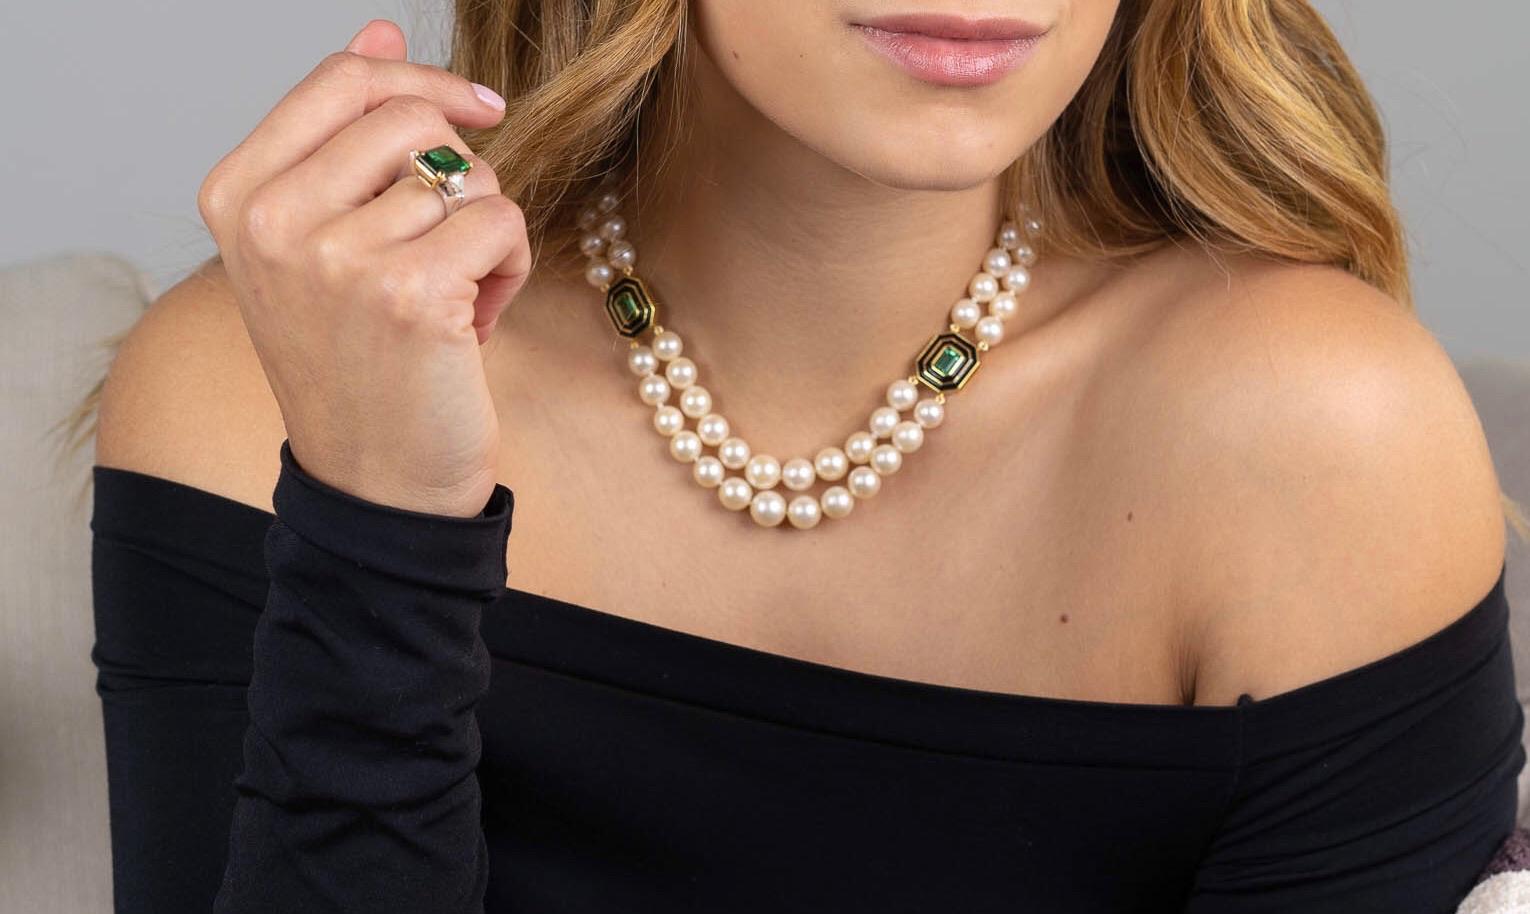 Estate Japanese Cultured Akoya Pearls meet a Modern styling in the Museum Series necklace by Andrew Glassford. The Beautiful Cream Colored Double Strand of Graduated Pearls are divided at 4 and 8 o'clock positions by 3.04 carats of Brazilian